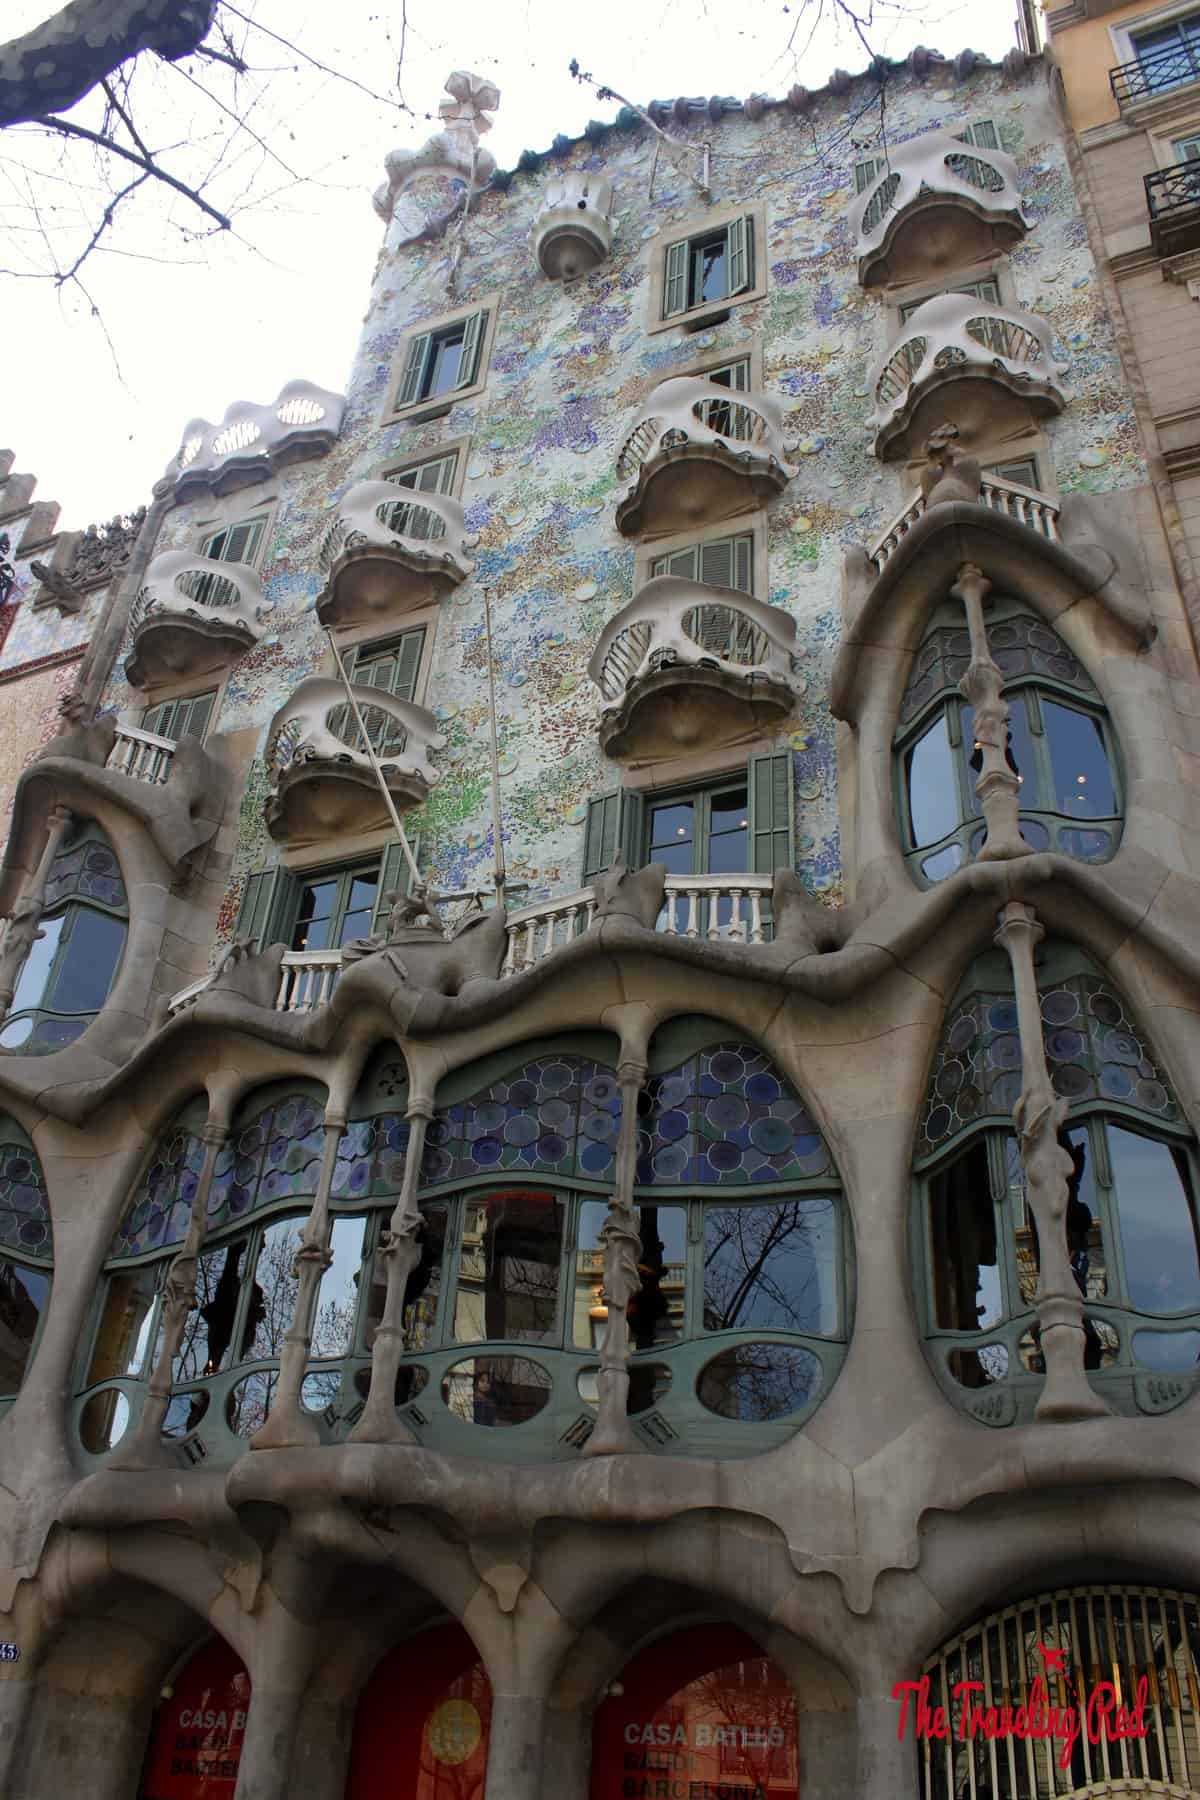 Strolling down Passeig de Gracia to see Casa Batlló, one of Antoni Gaudí famous architectural works in Barcelona, Spain.